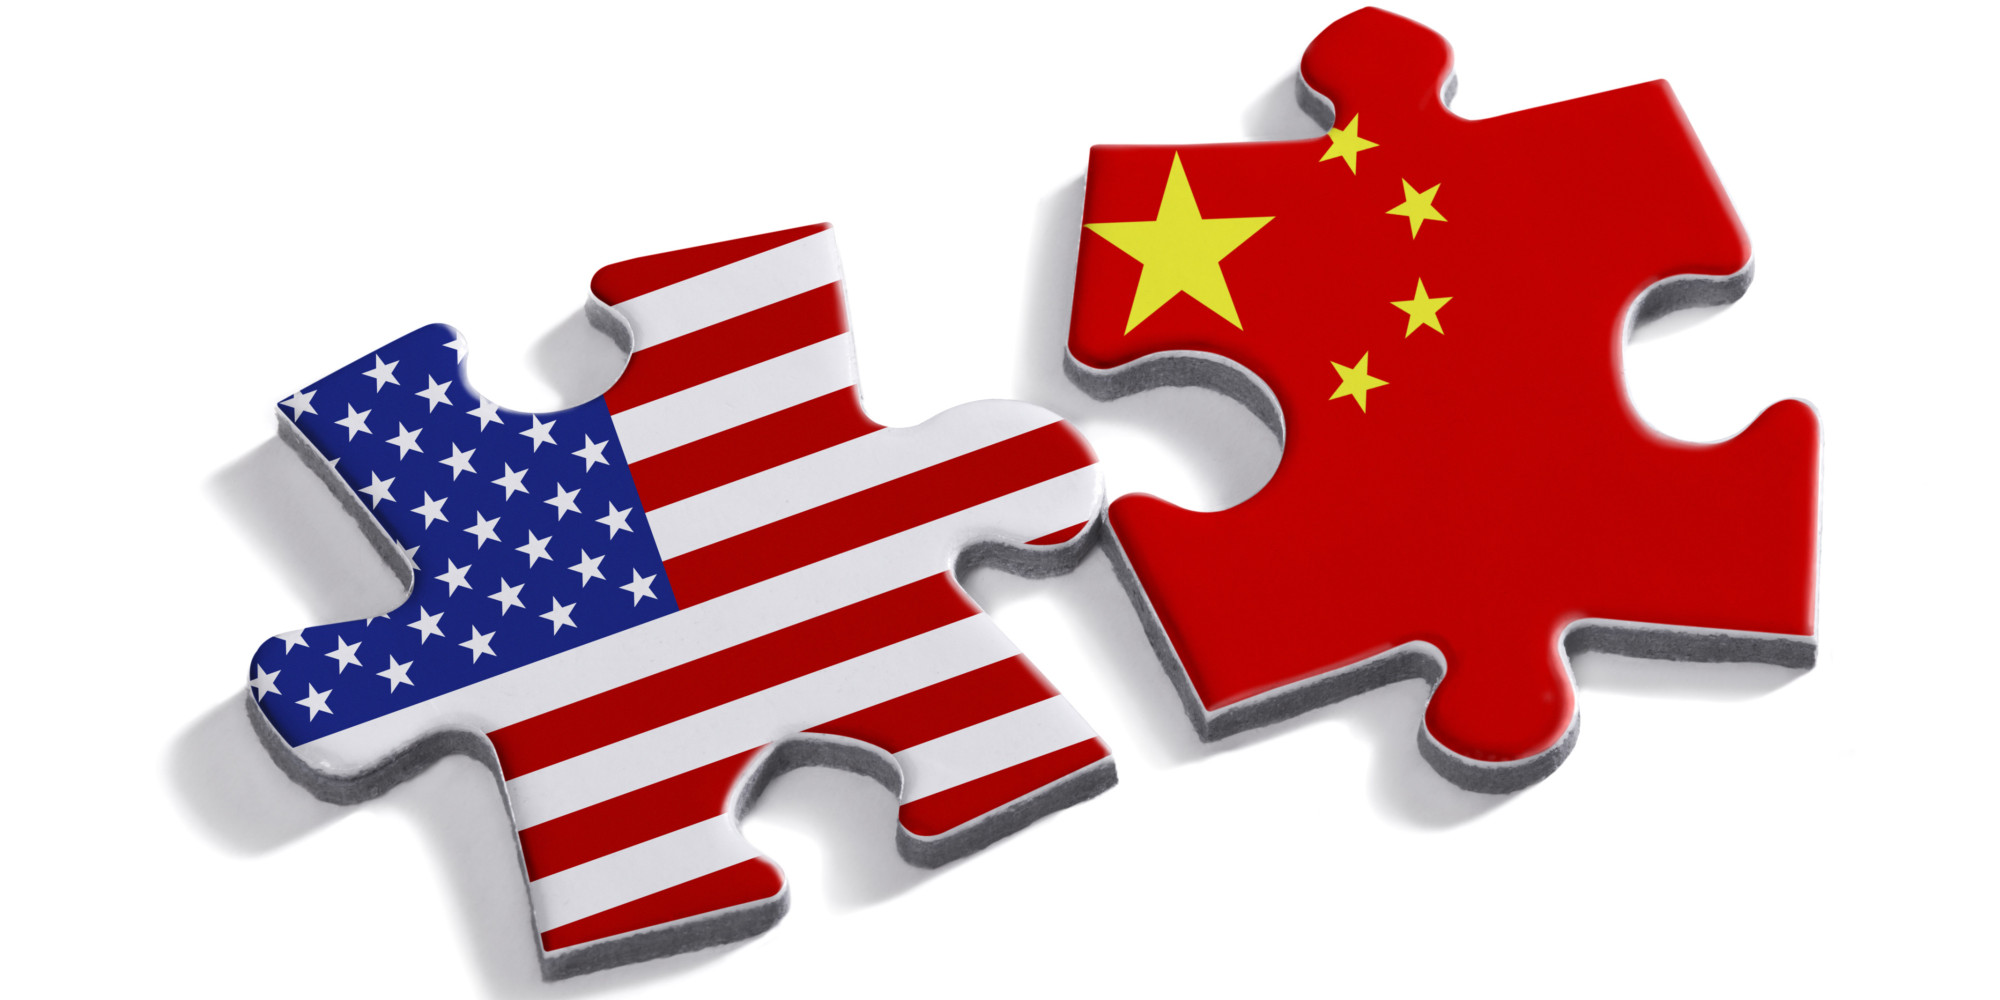 America and china relations